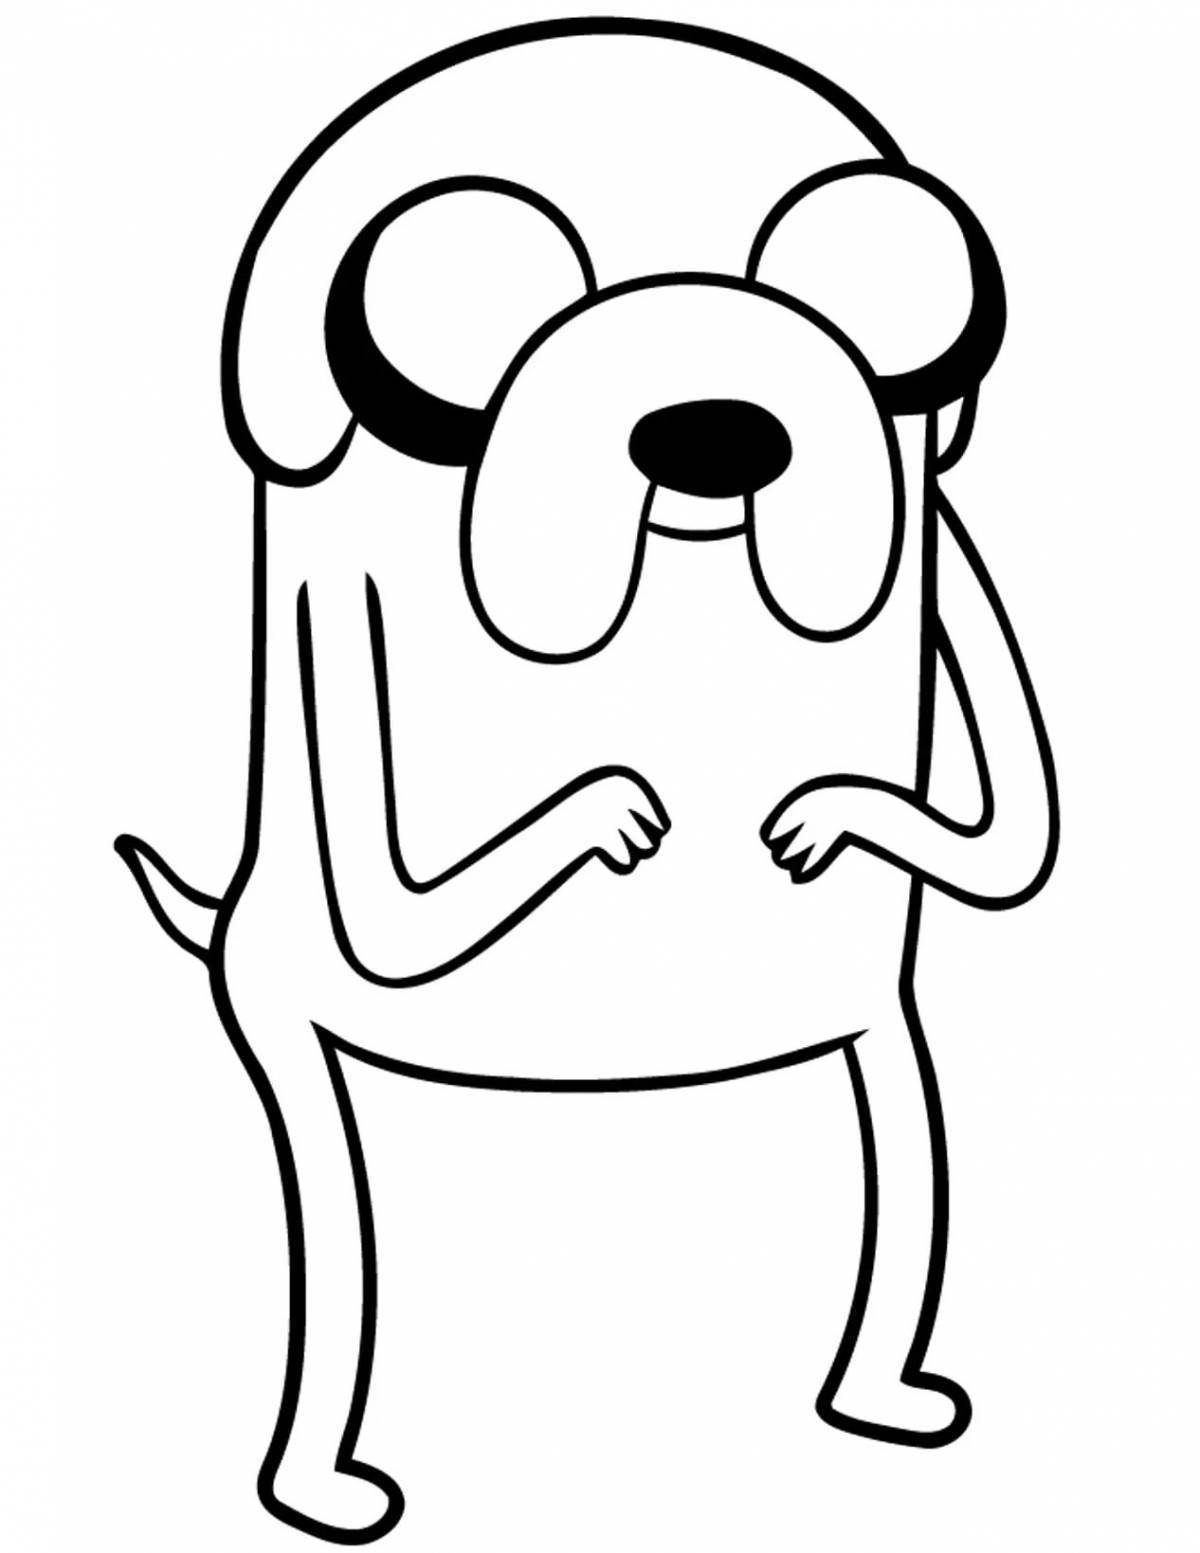 Coloring pages adventure time jake